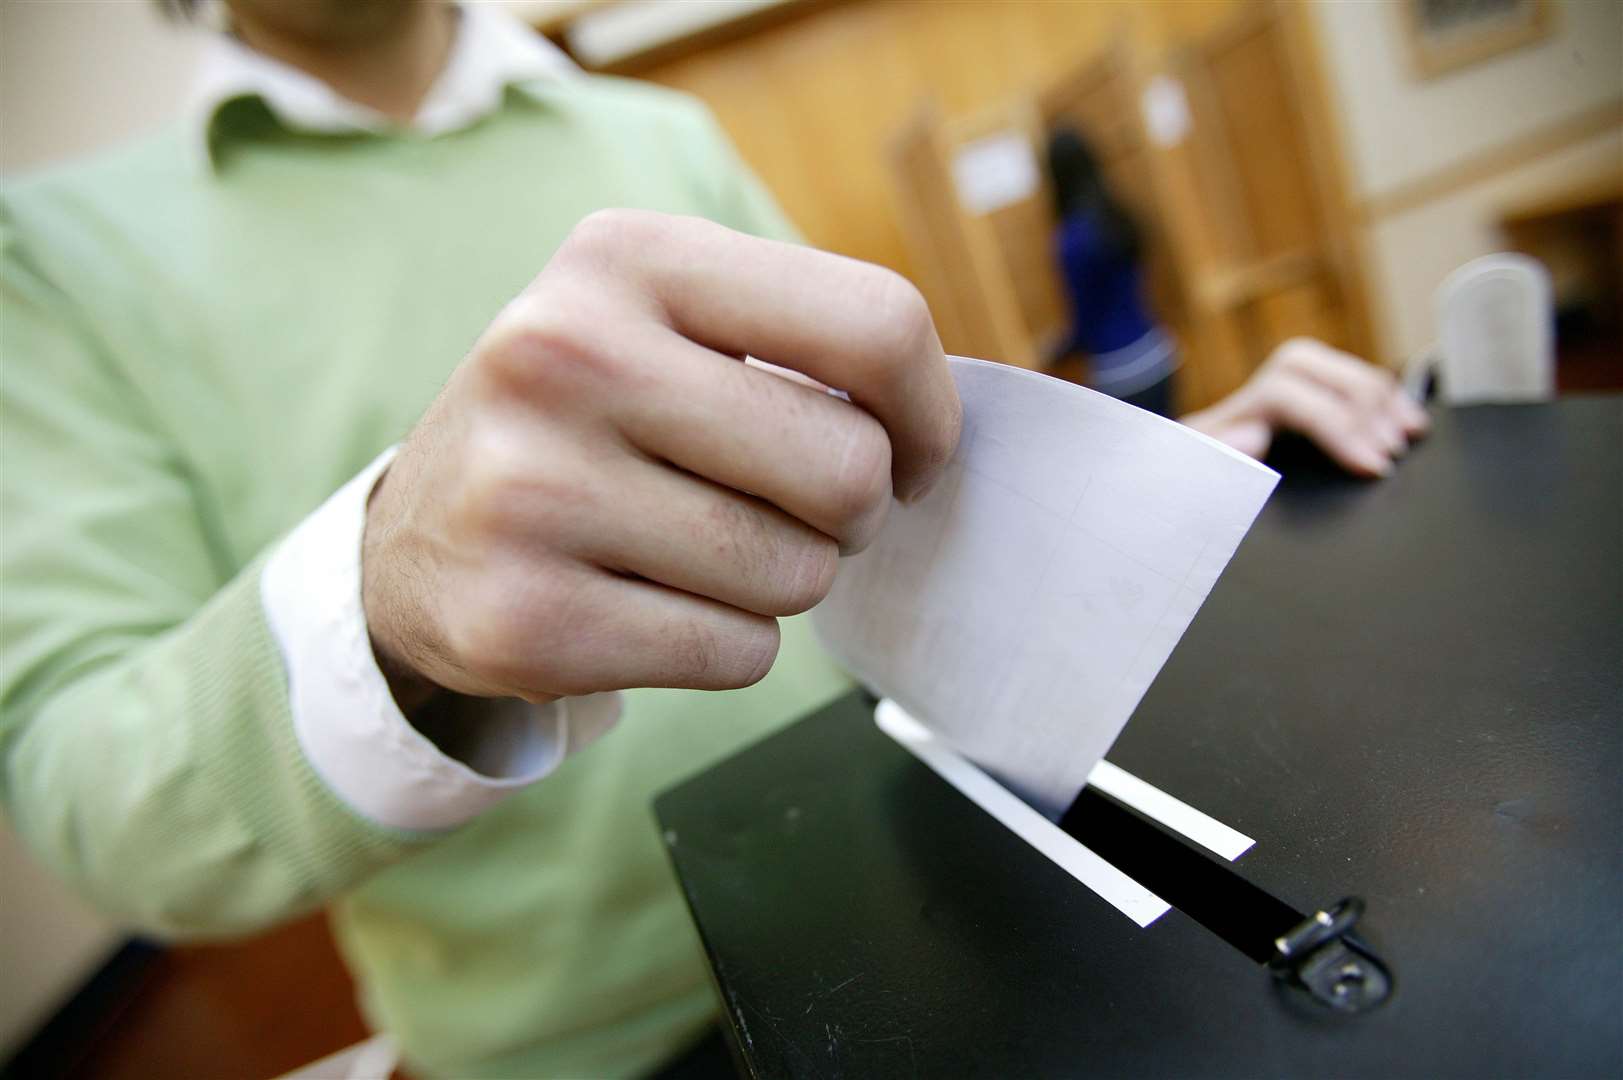 The public is being asked to make their vote count in the upcoming local elections.